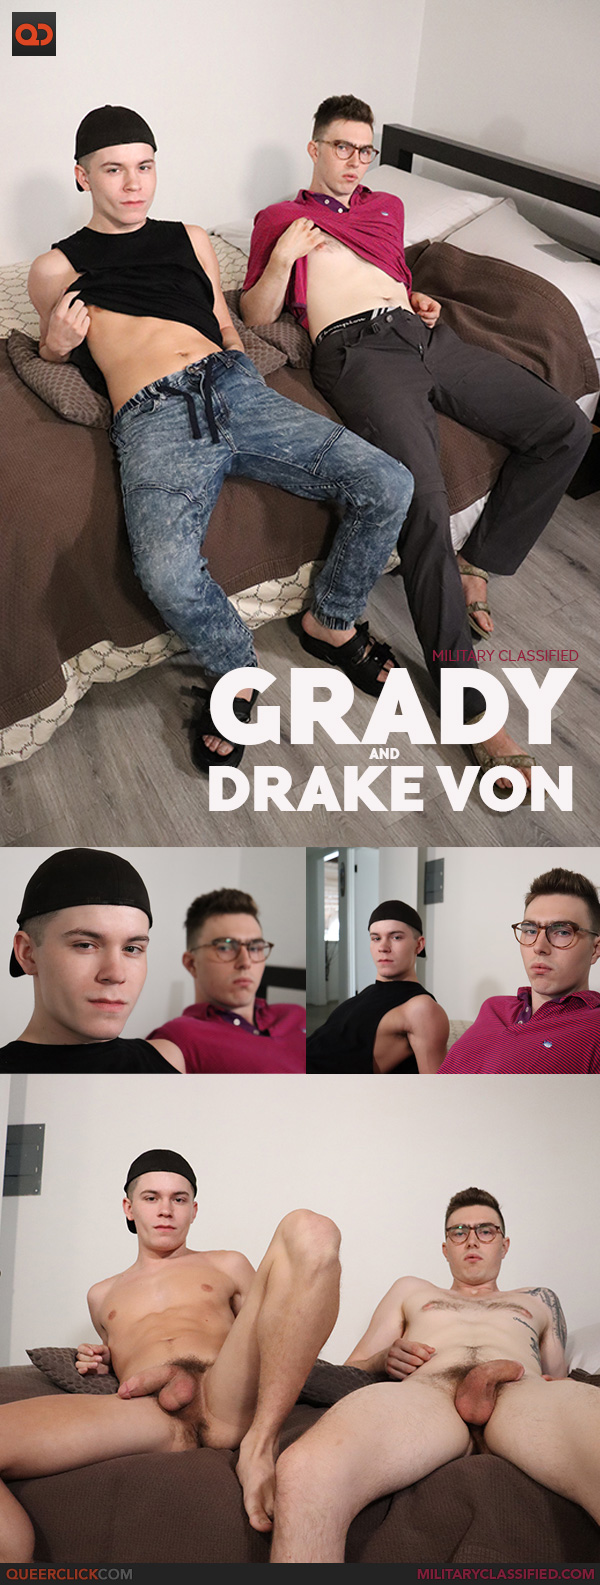 Military Classified: Drake Von and Grady